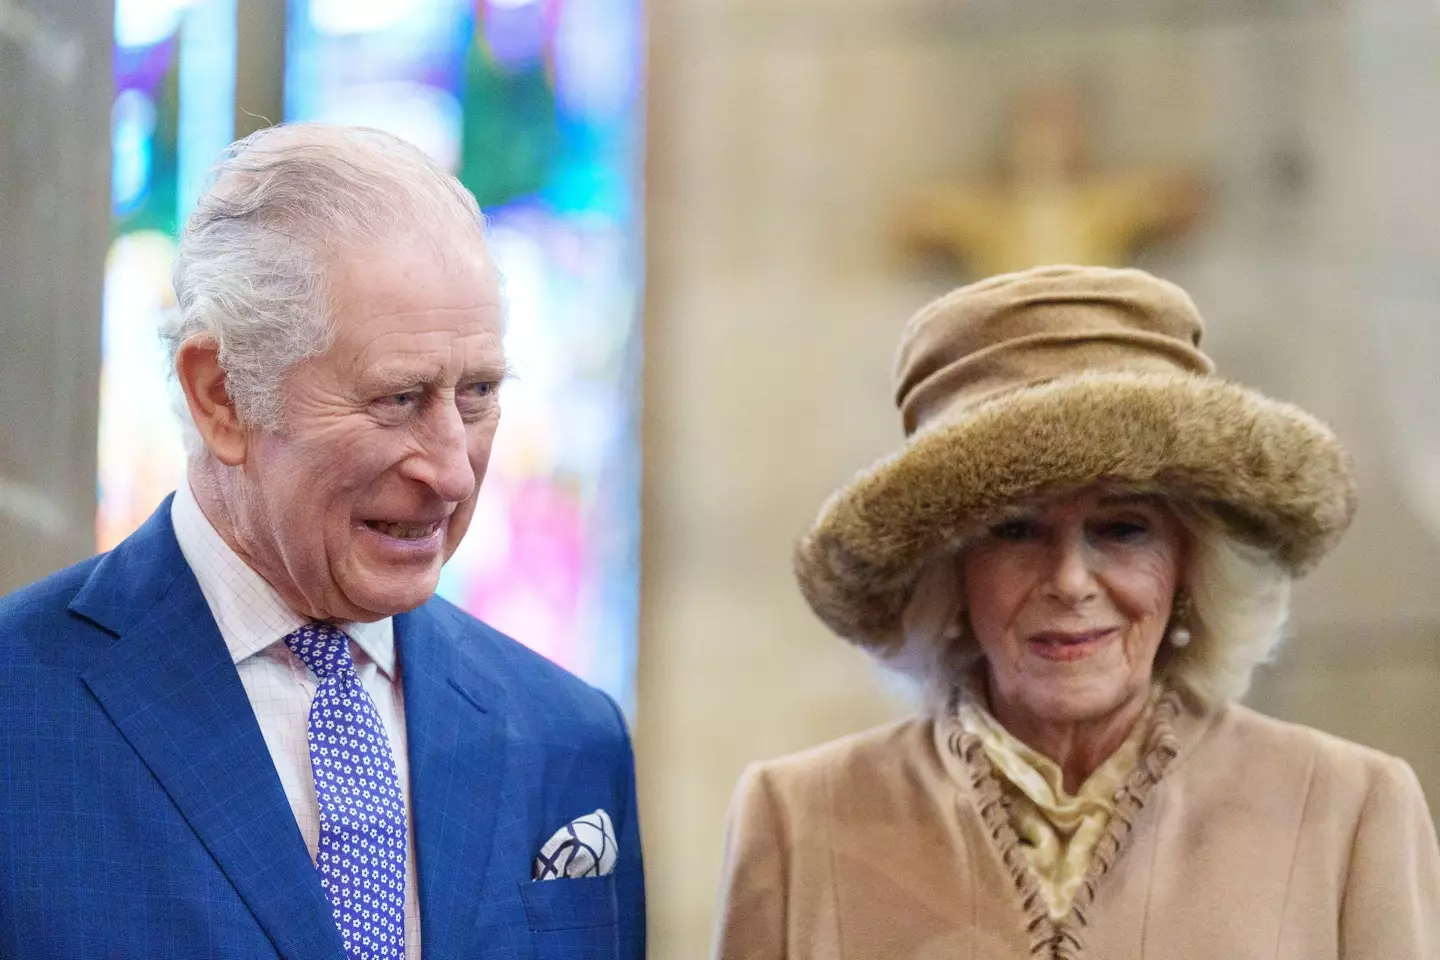 Charles and Camilla married in 2005, ten years after Camilla divorced Andrew Parker Bowles.